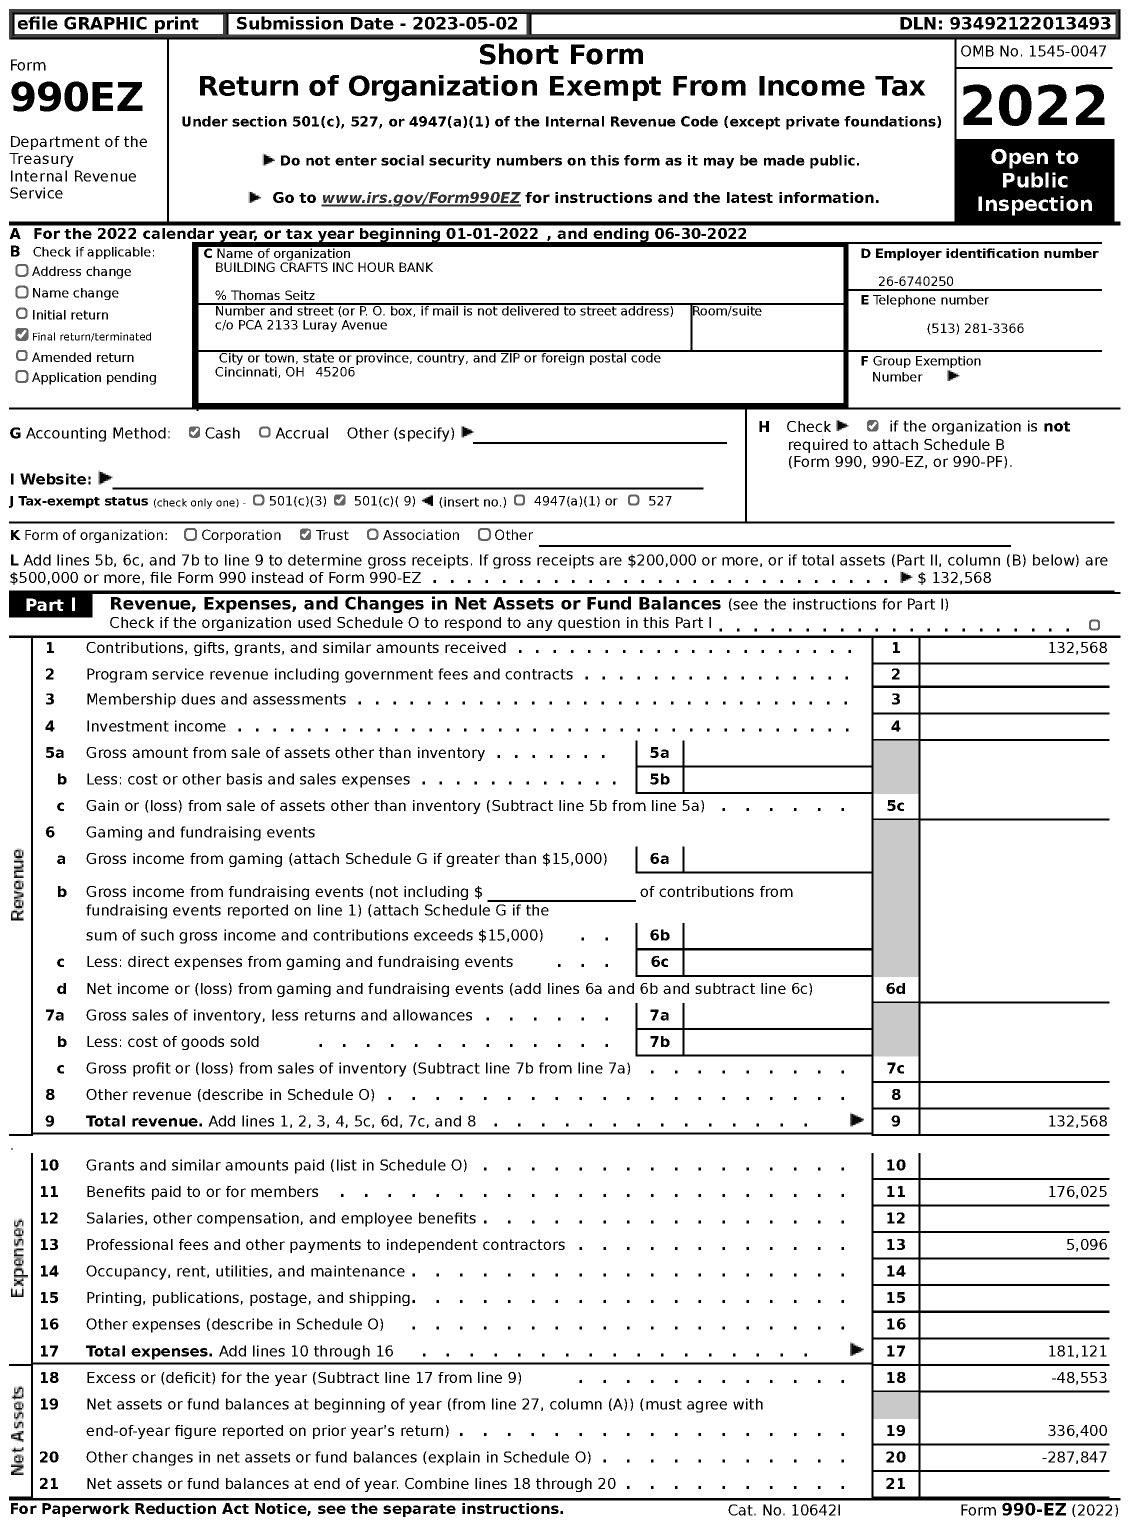 Image of first page of 2021 Form 990EZ for Building Crafts Hour Bank